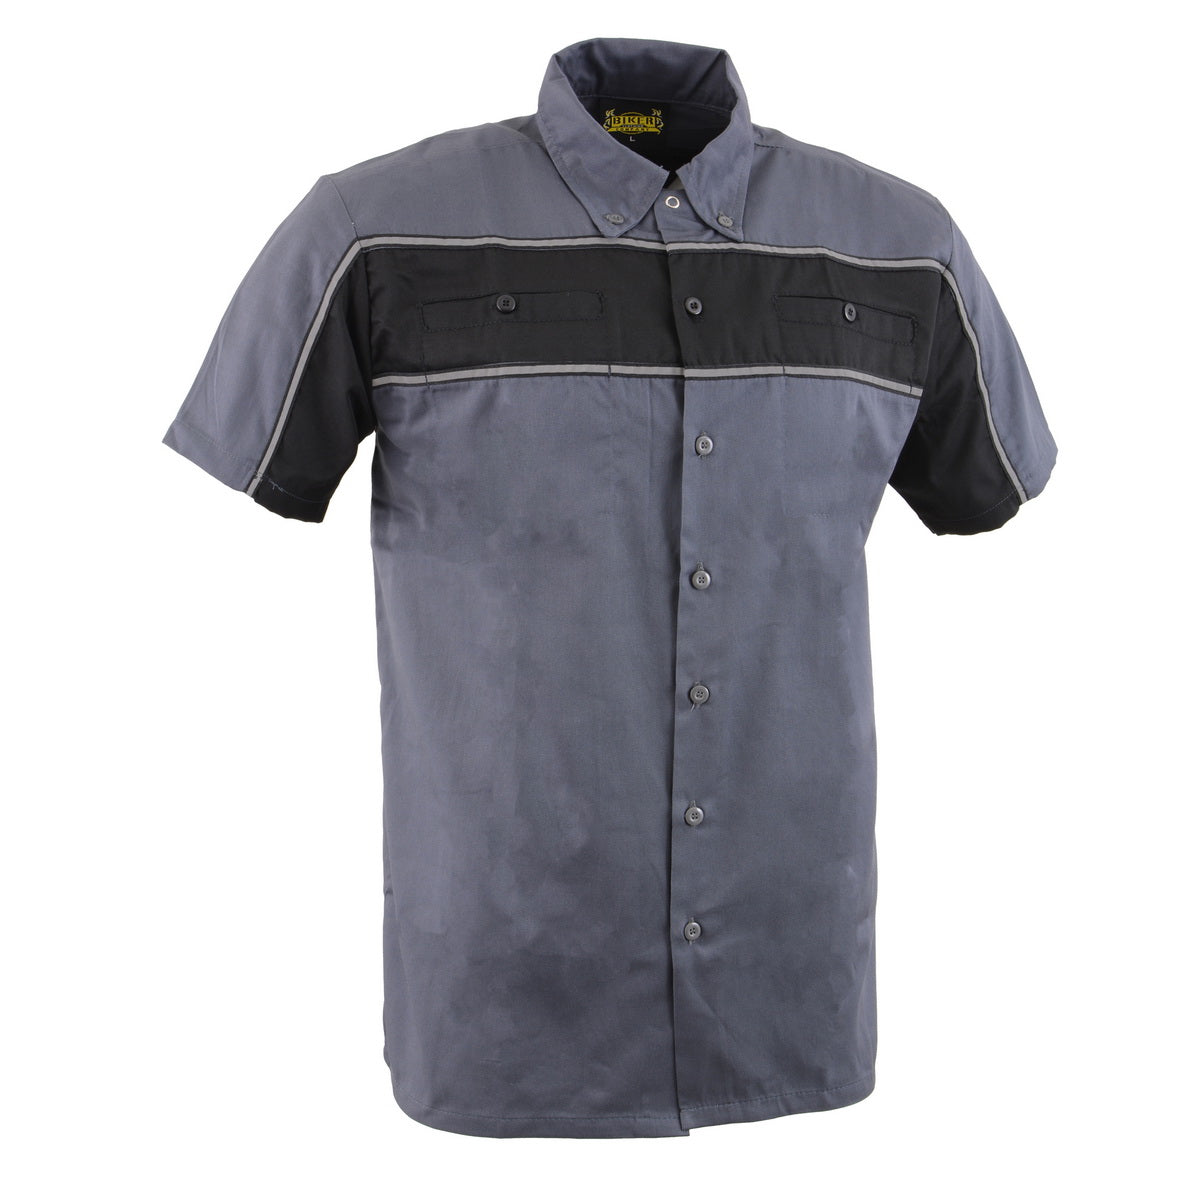 Milwaukee Leather MDM11671.149 Men's Grey and Black Button Up Heavy-Duty Work Shirt for | Classic Mechanic Work Shirt